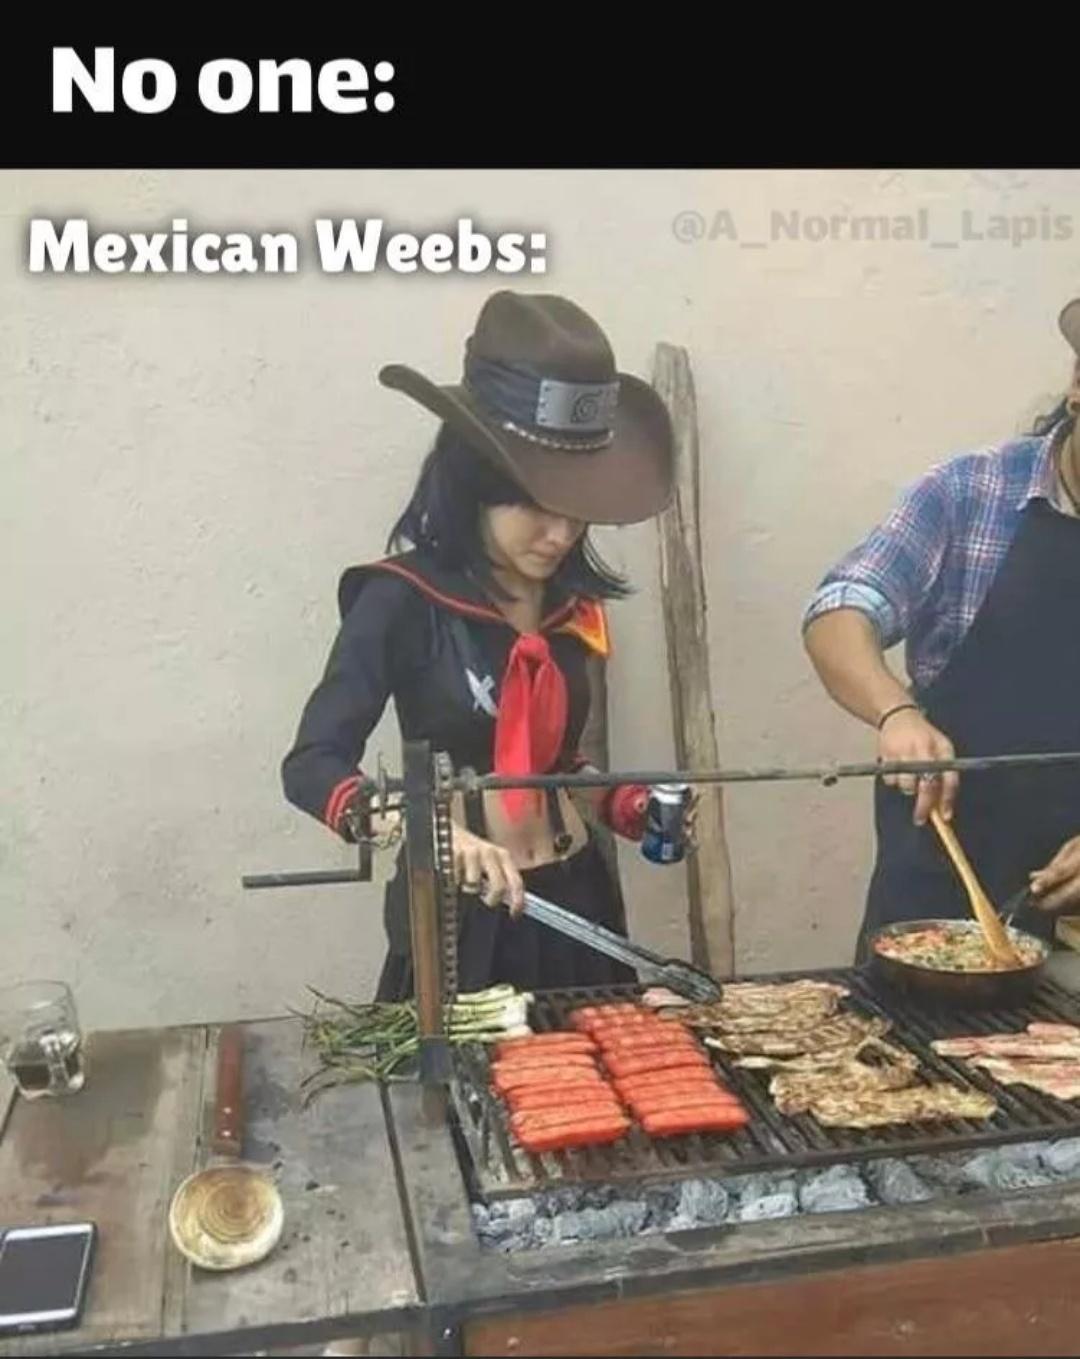 grill la grill - No one Mexican Weebs